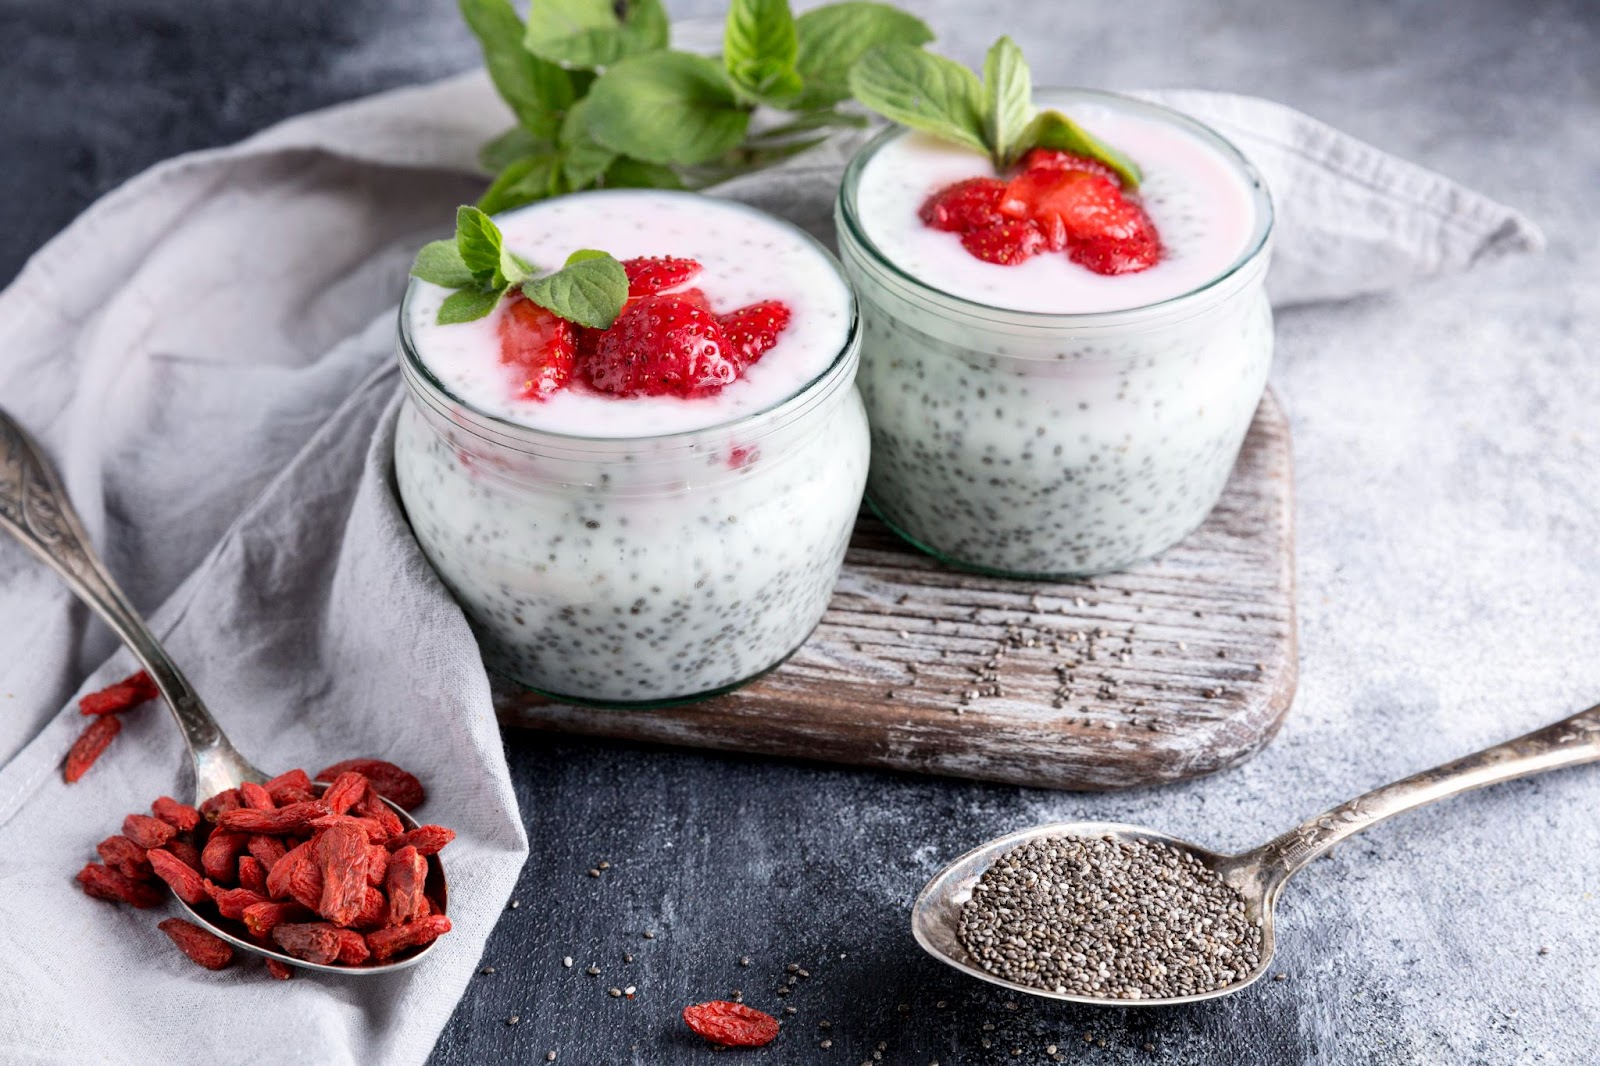 know how to eat chia seeds for weight loss